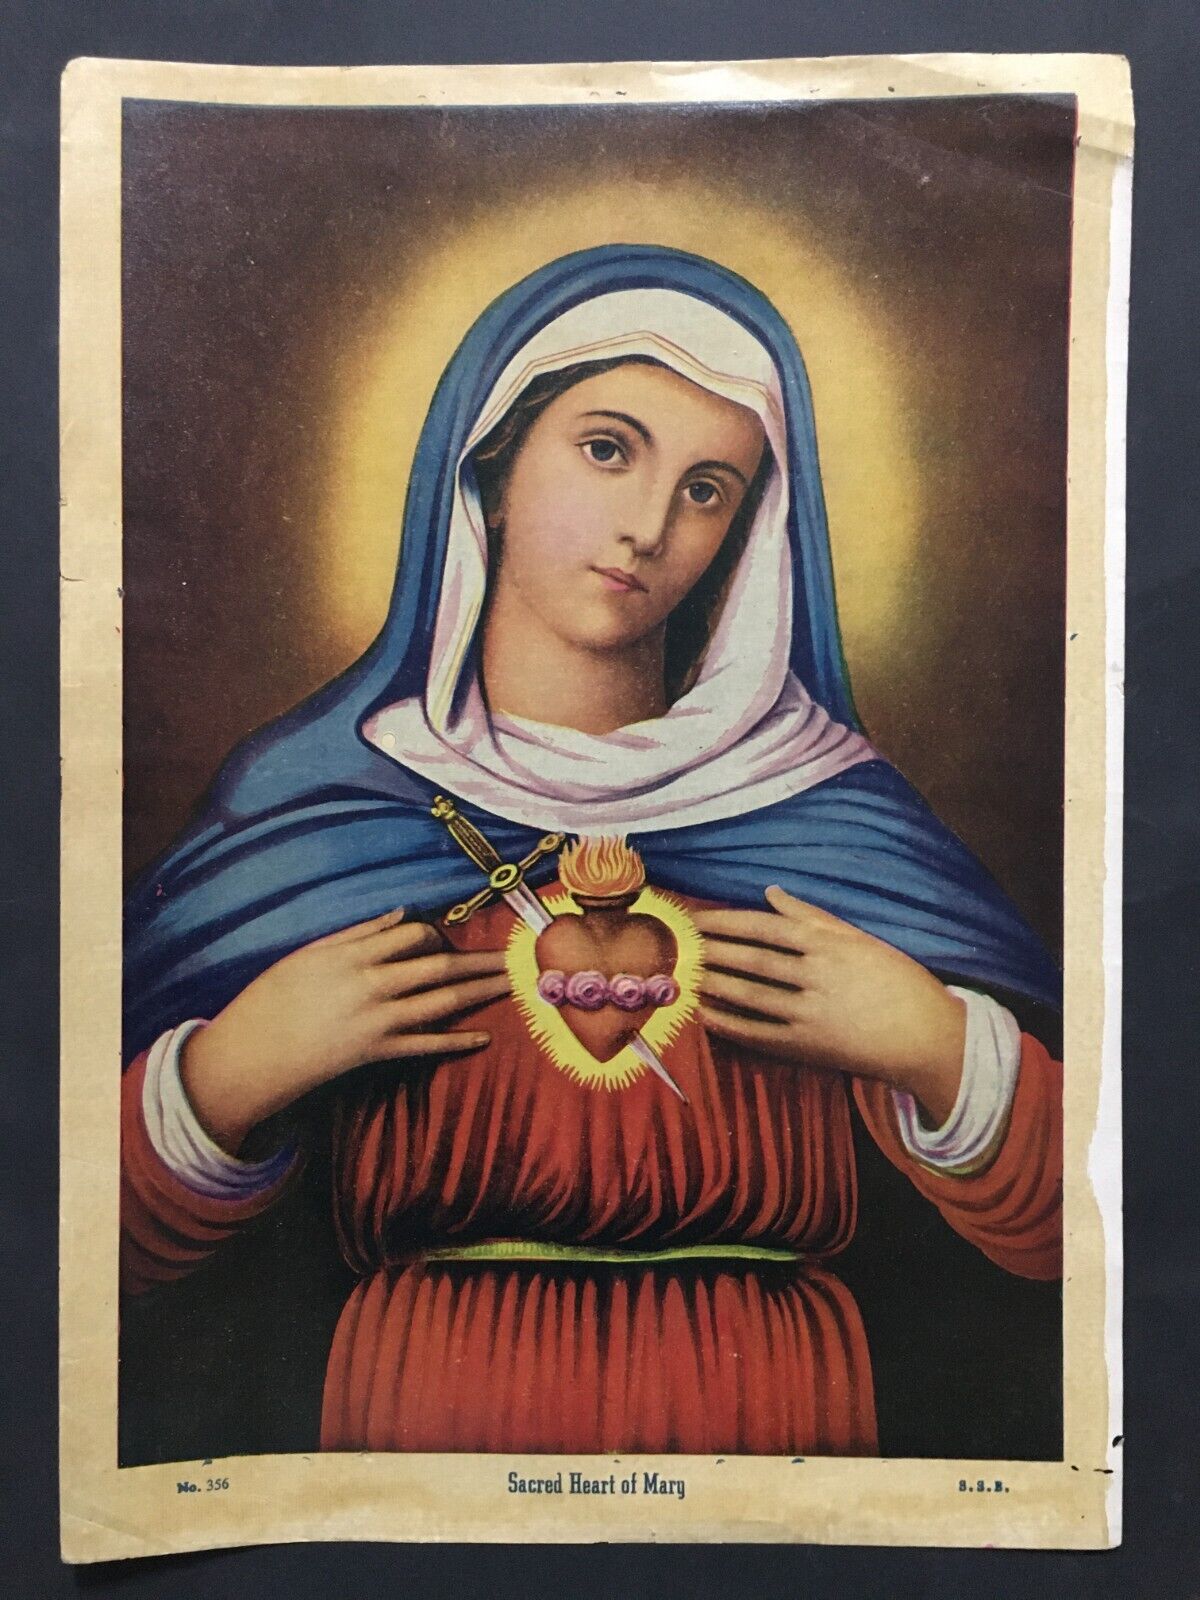 India 50\'s Vintage Print SACRED HEART OF MARY 10in x 14in (11812)